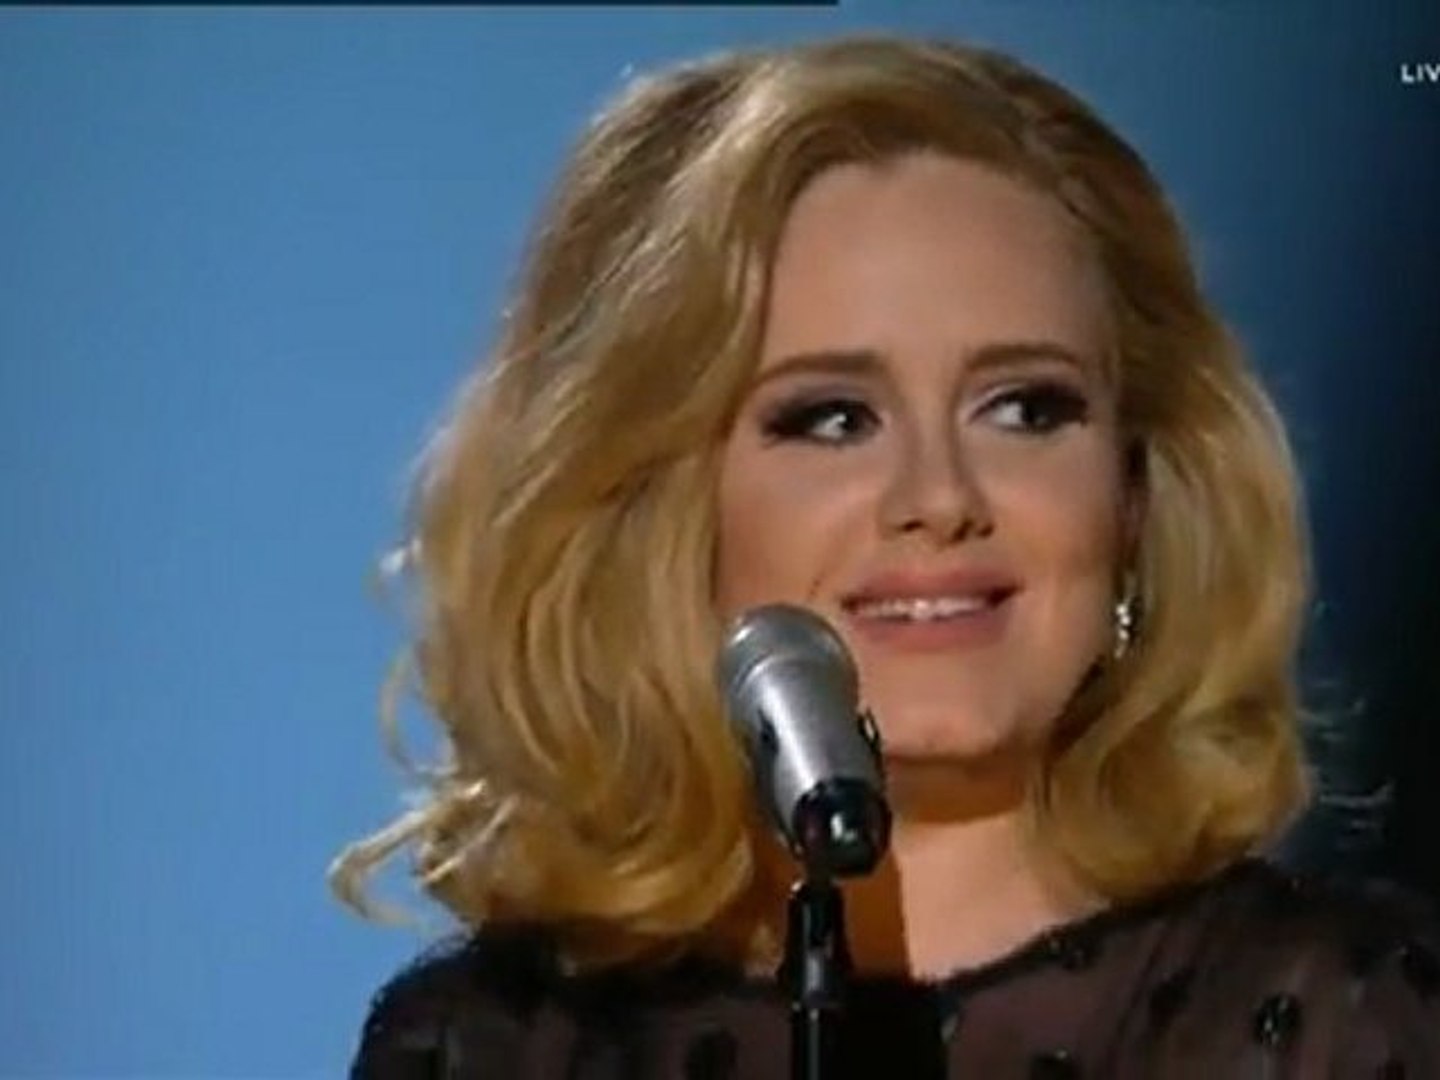 Adele at the 54th Grammy Awards 2012 Rolling in the Deep - video Dailymotion